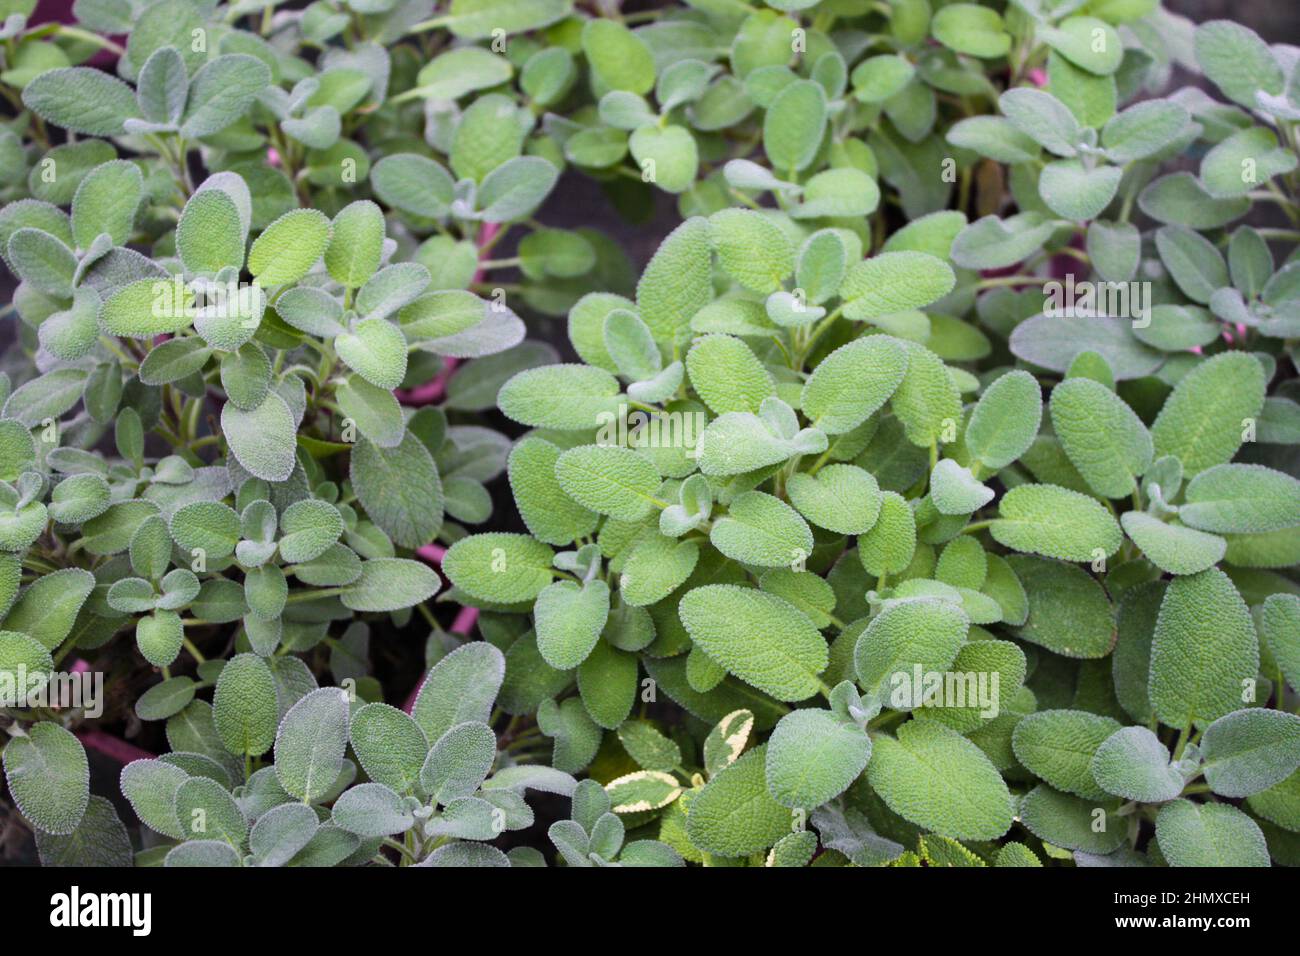 Close-up of many Salvia maxima sage plants in flower pots for sale. Green natural background. Stock Photo